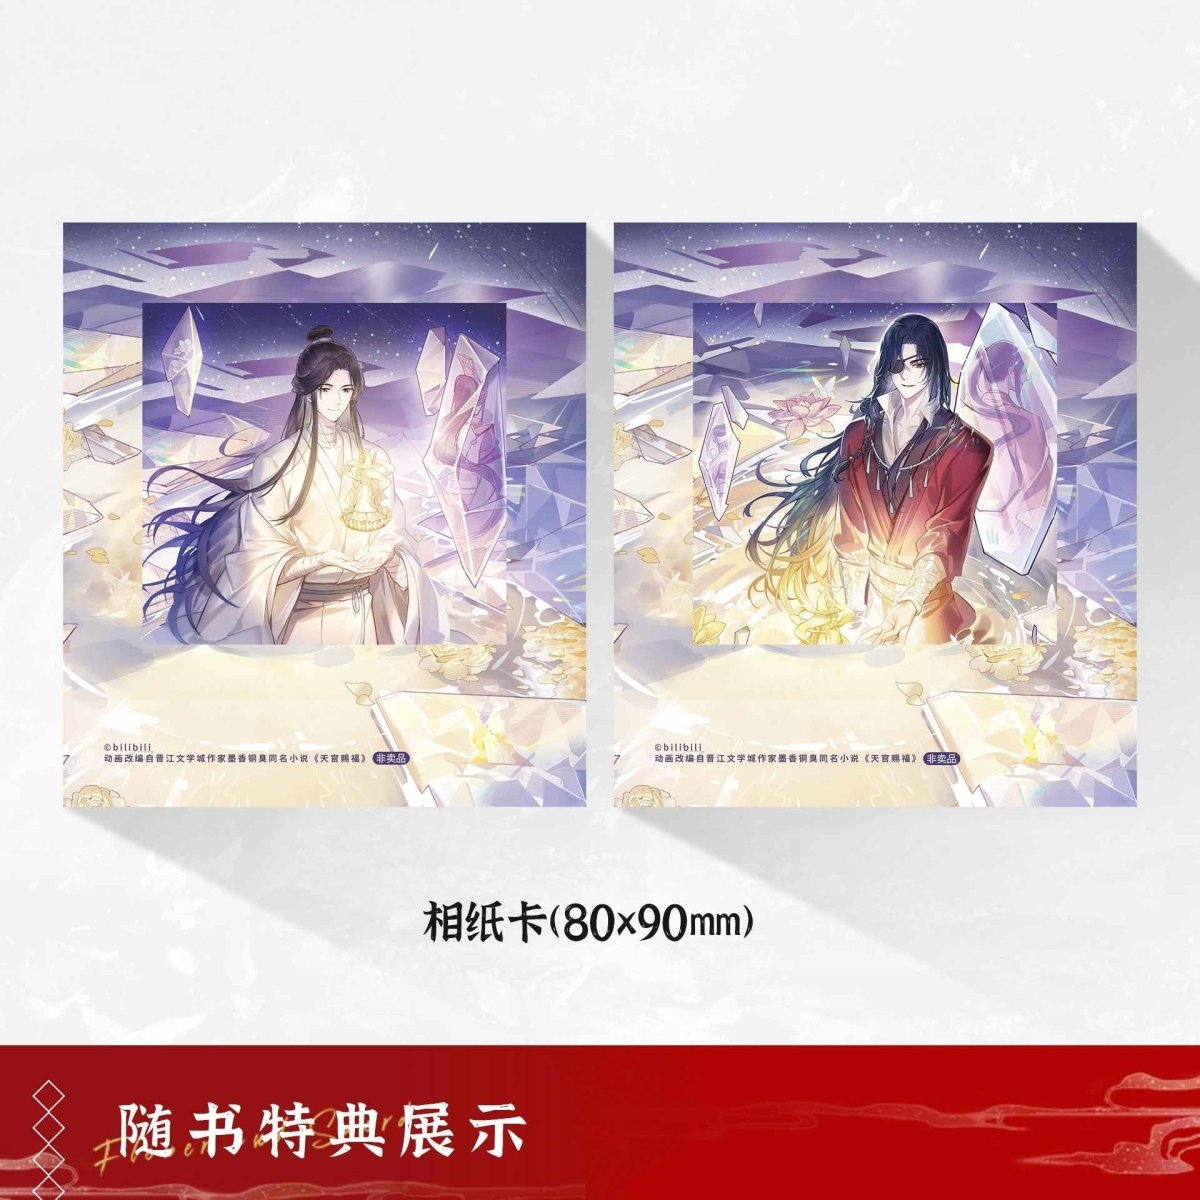 Heaven Official's Blessing | One Flower, One Sword: Tian Guan Ci Fu Animation Book Bilibili Comic- FUNIMECITY